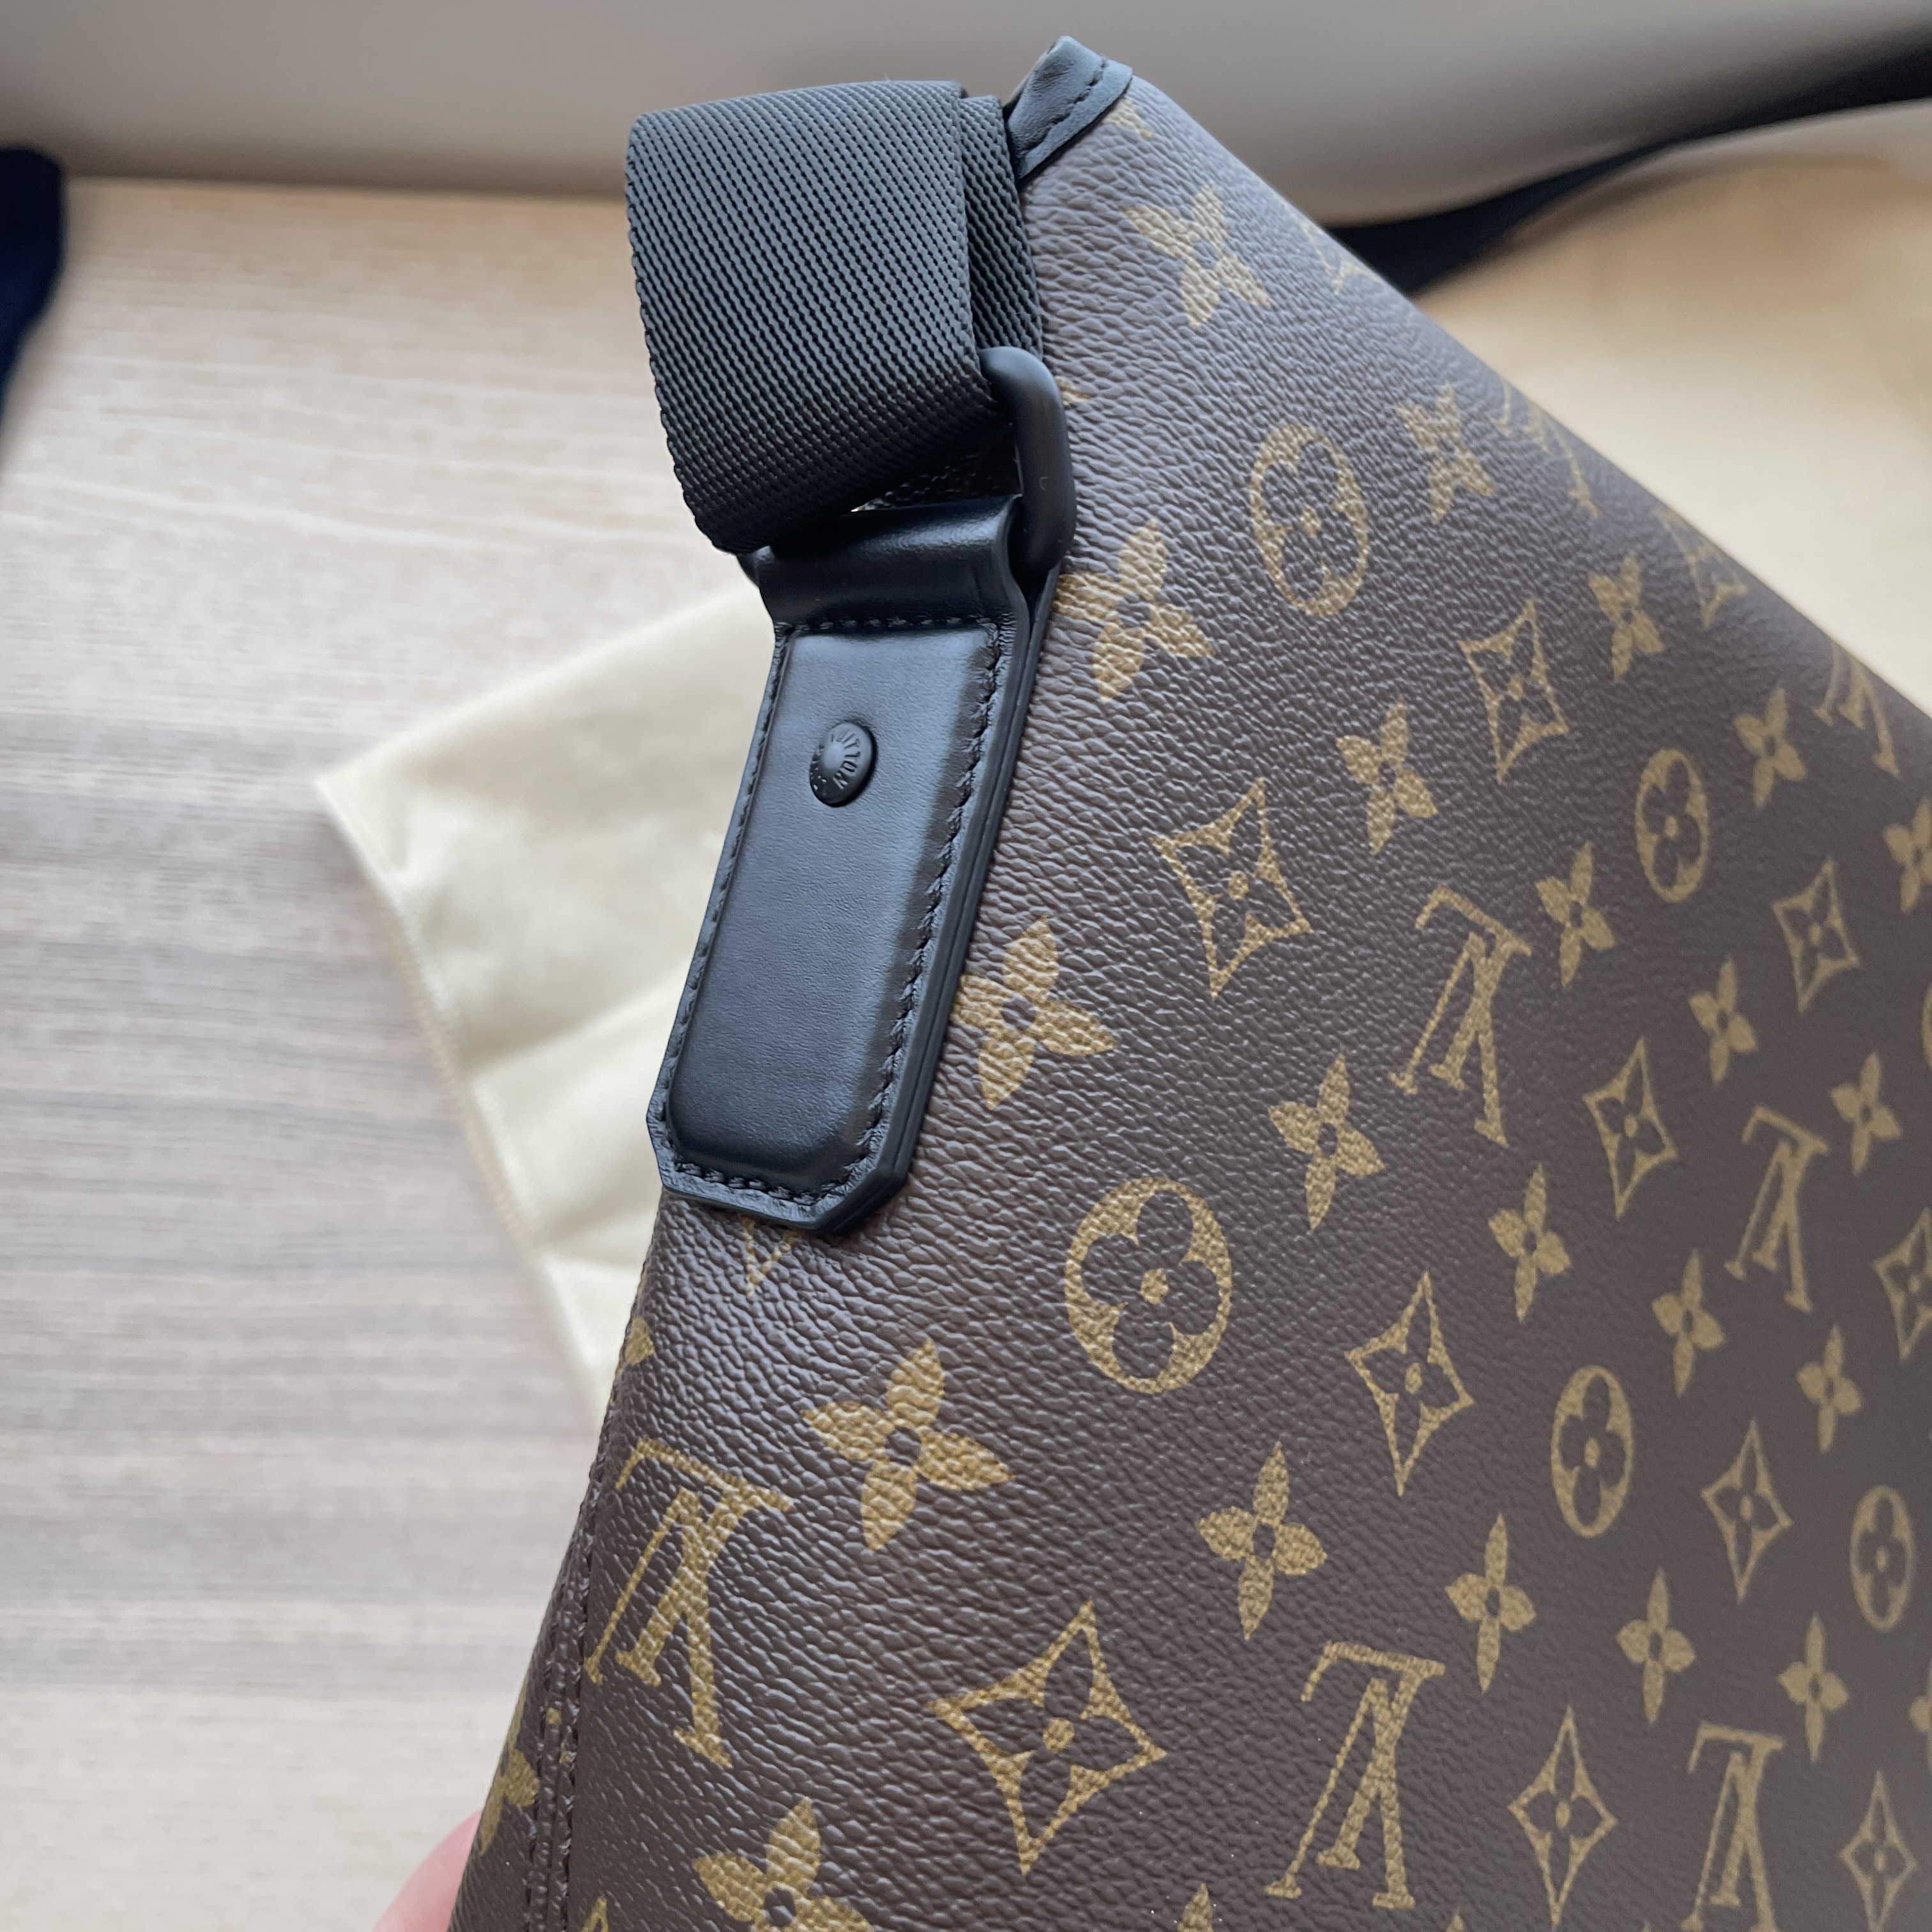 My first LV - Magnetic Messenger. Feeling awesome. : r/Louisvuitton